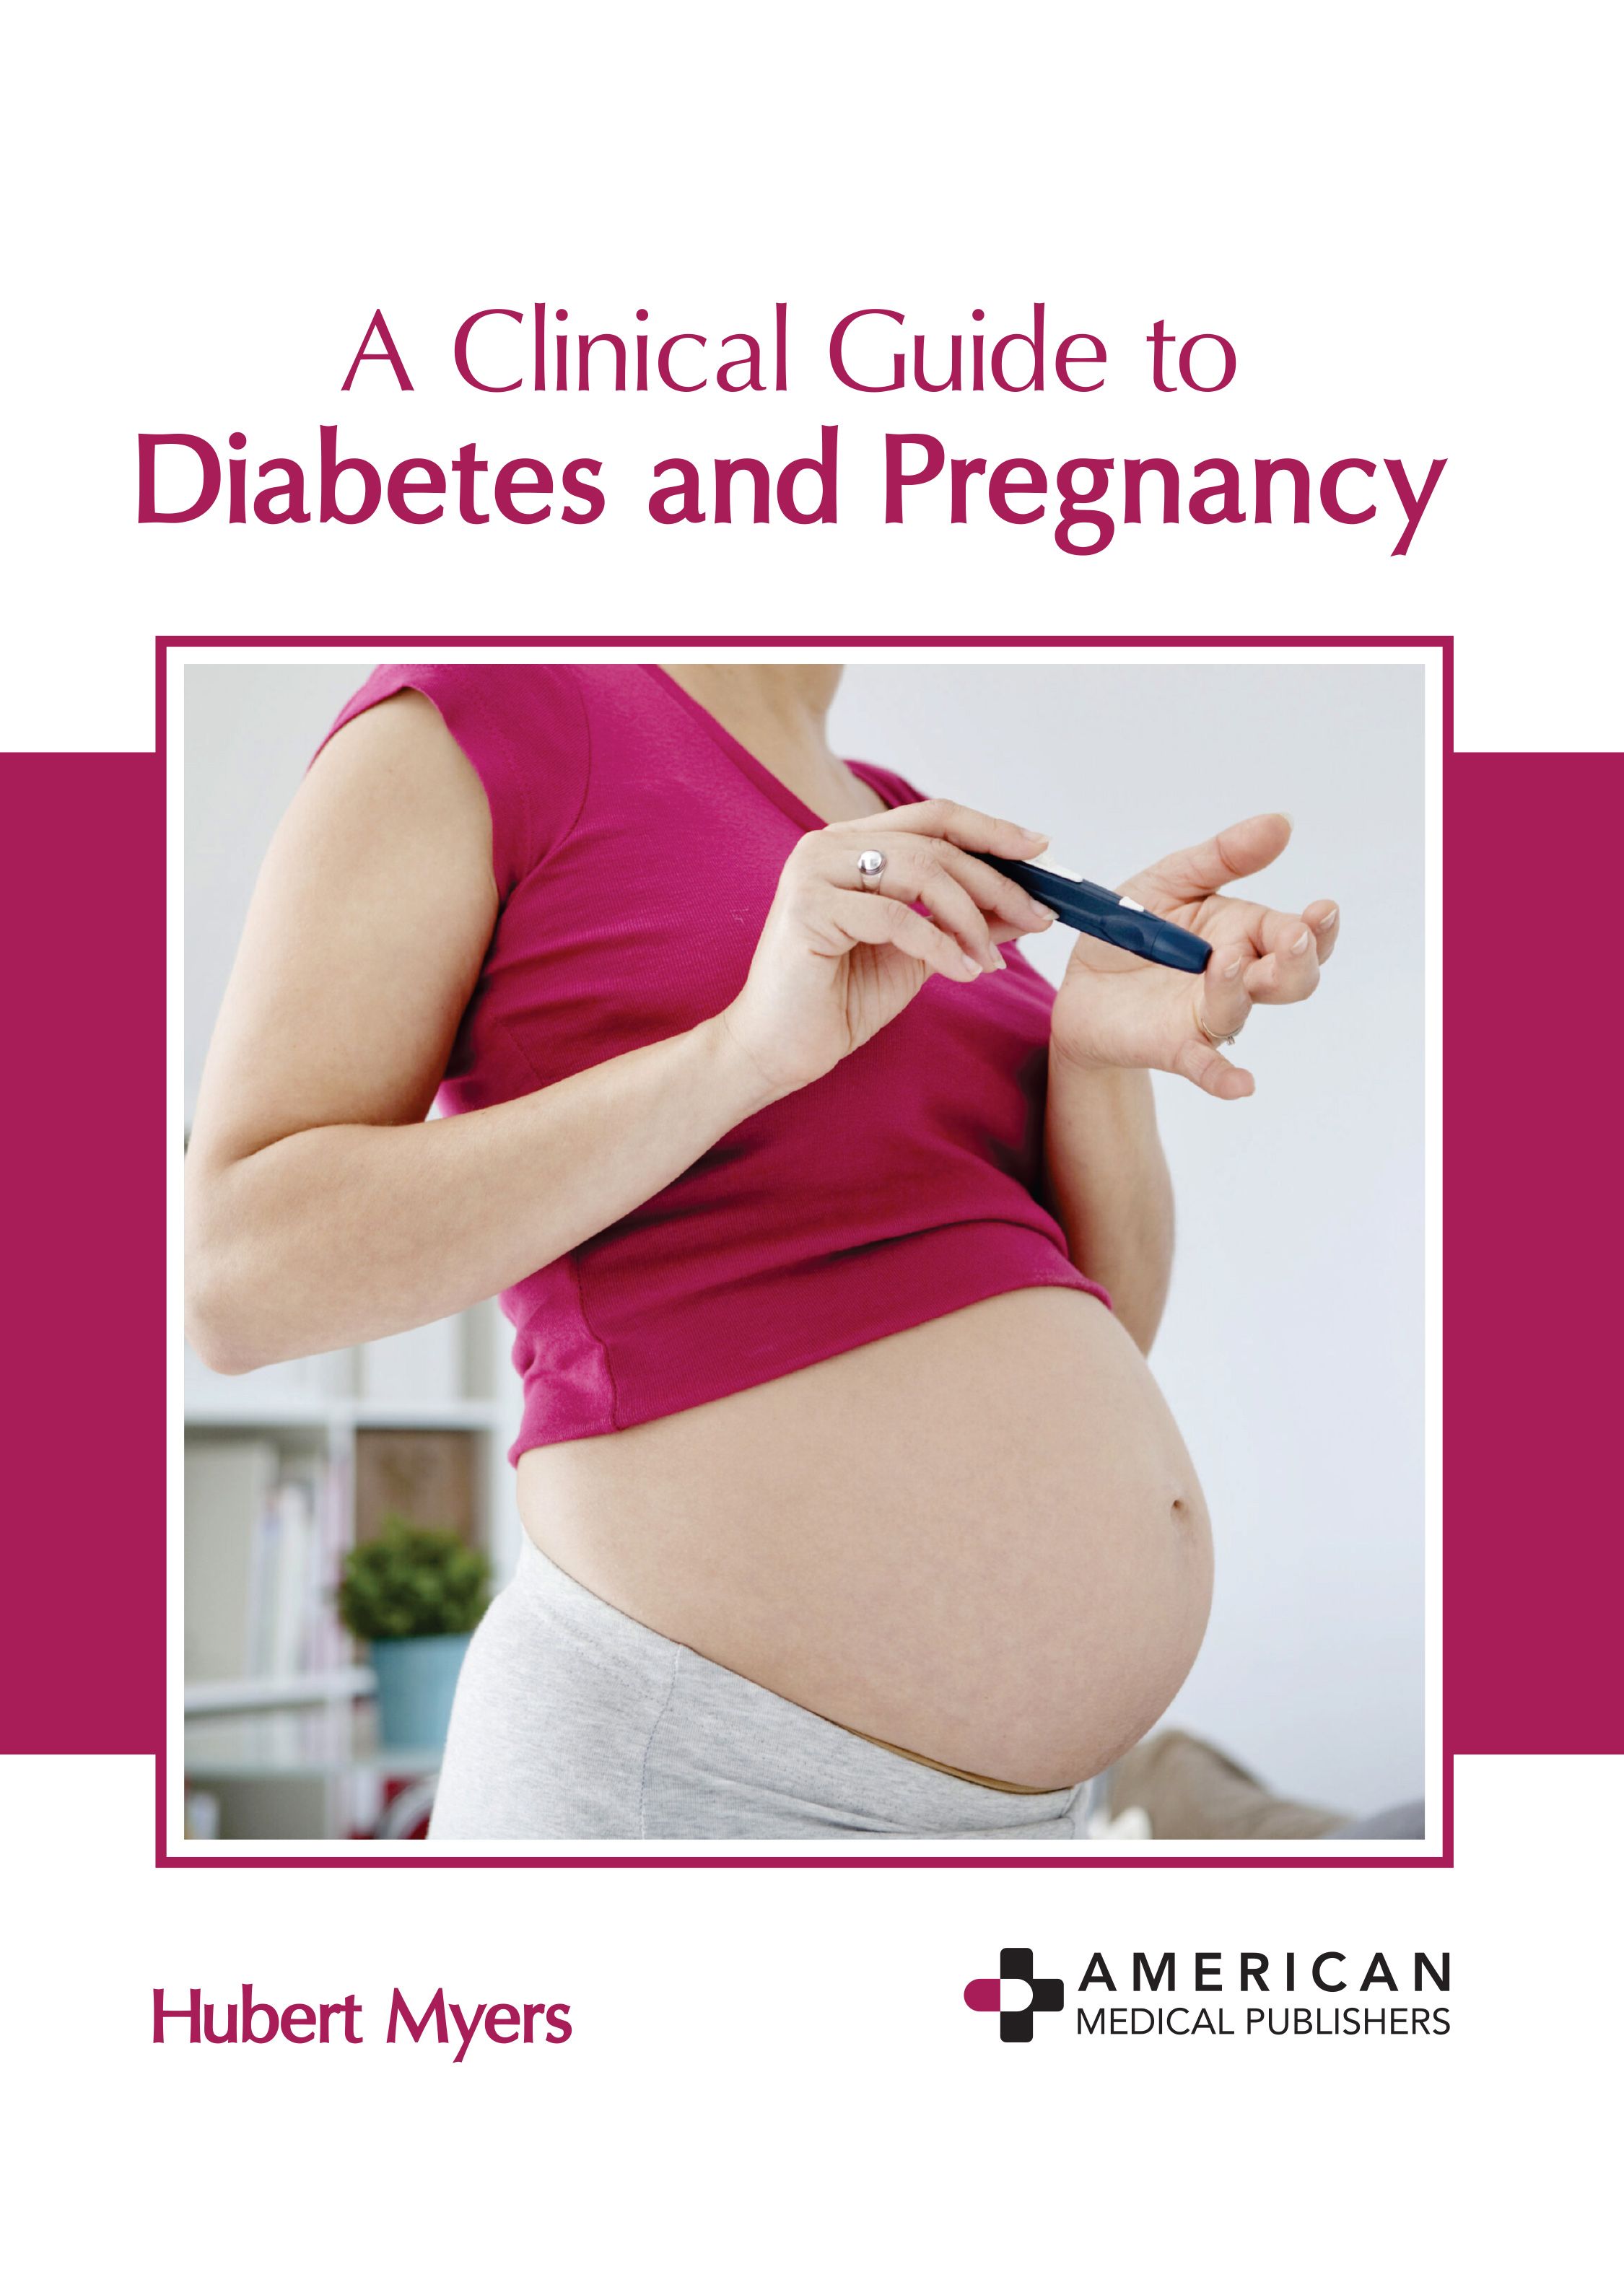 

exclusive-publishers/american-medical-publishers/a-clinical-guide-to-diabetes-and-pregnancy-9798887400488